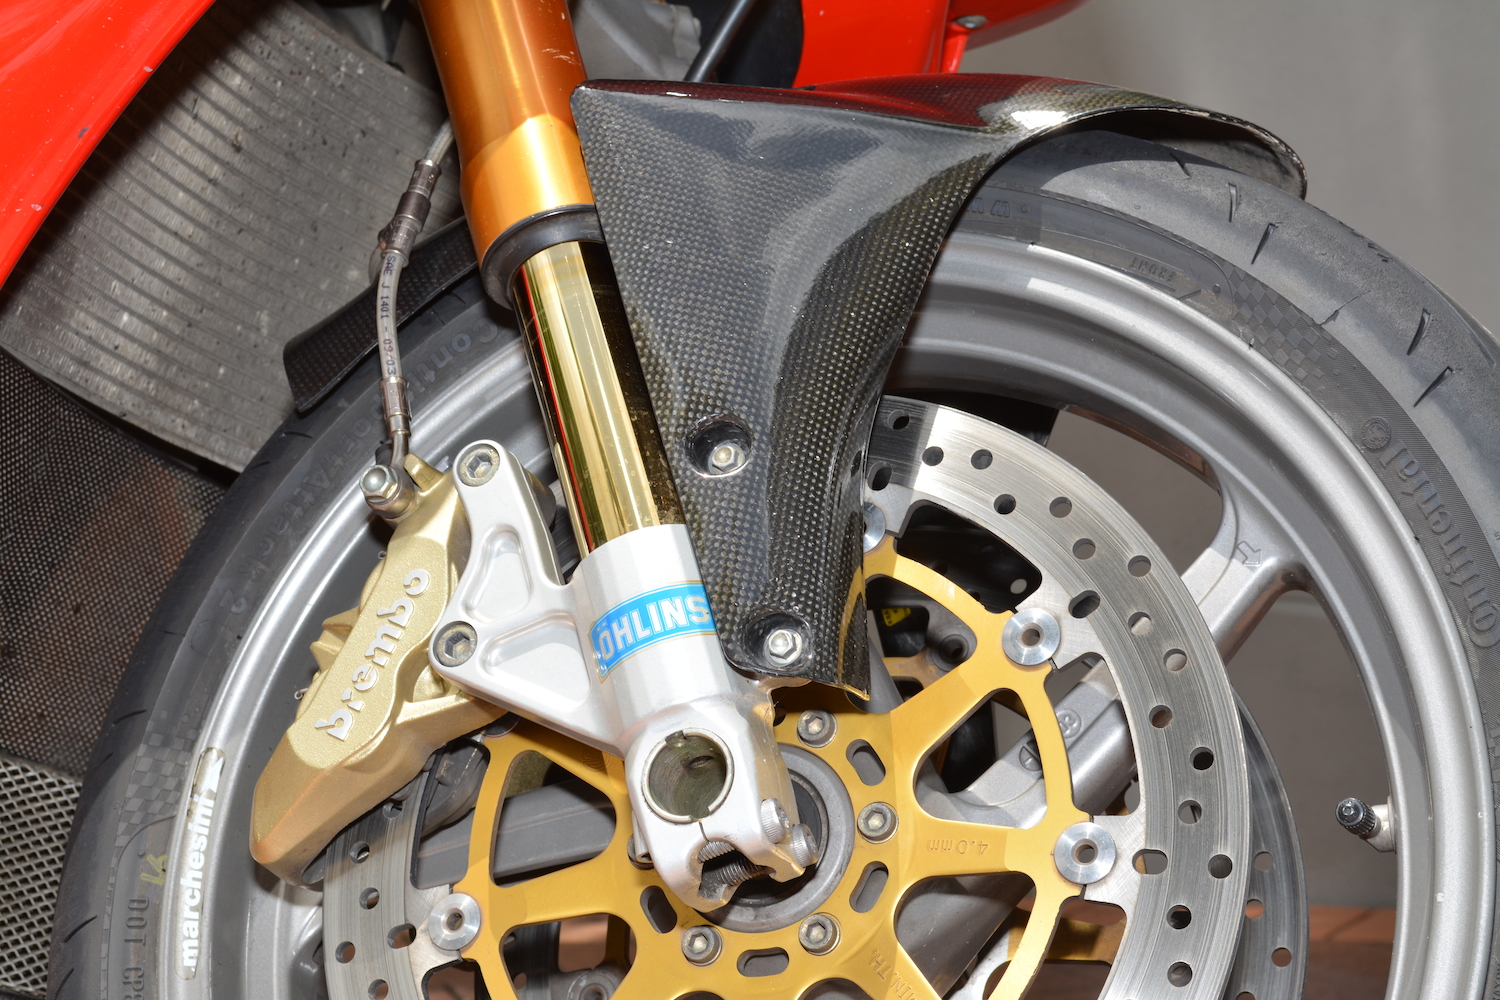 2004 Ducati 998S Final Edition with Ohlins suspension - simple